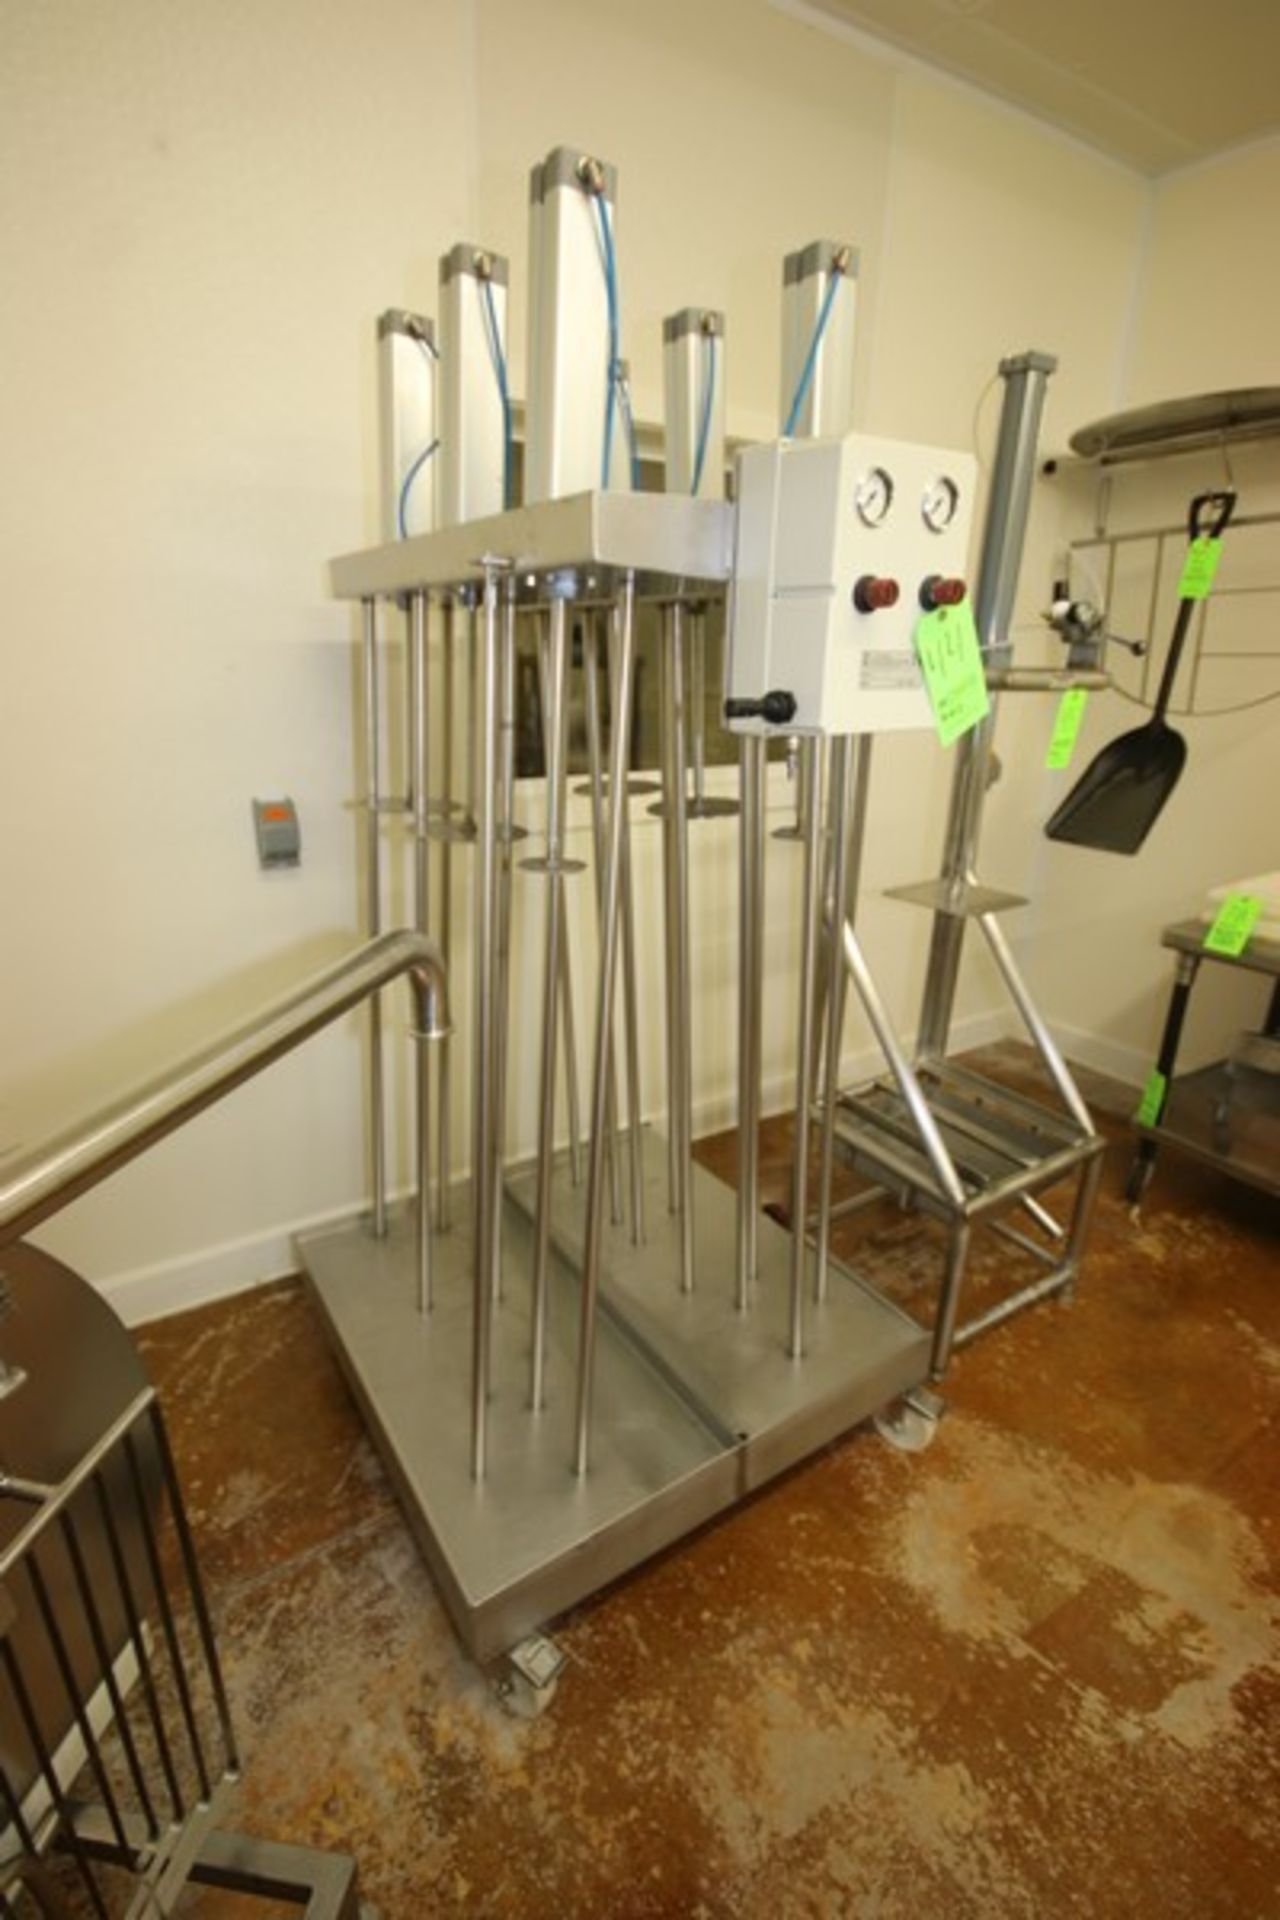 L.A. VAN ZIJLL Cheese Press, with 6-S/S Press Heads with 6-Pneumatic Cylinders, Mounted on S/S - Image 2 of 6